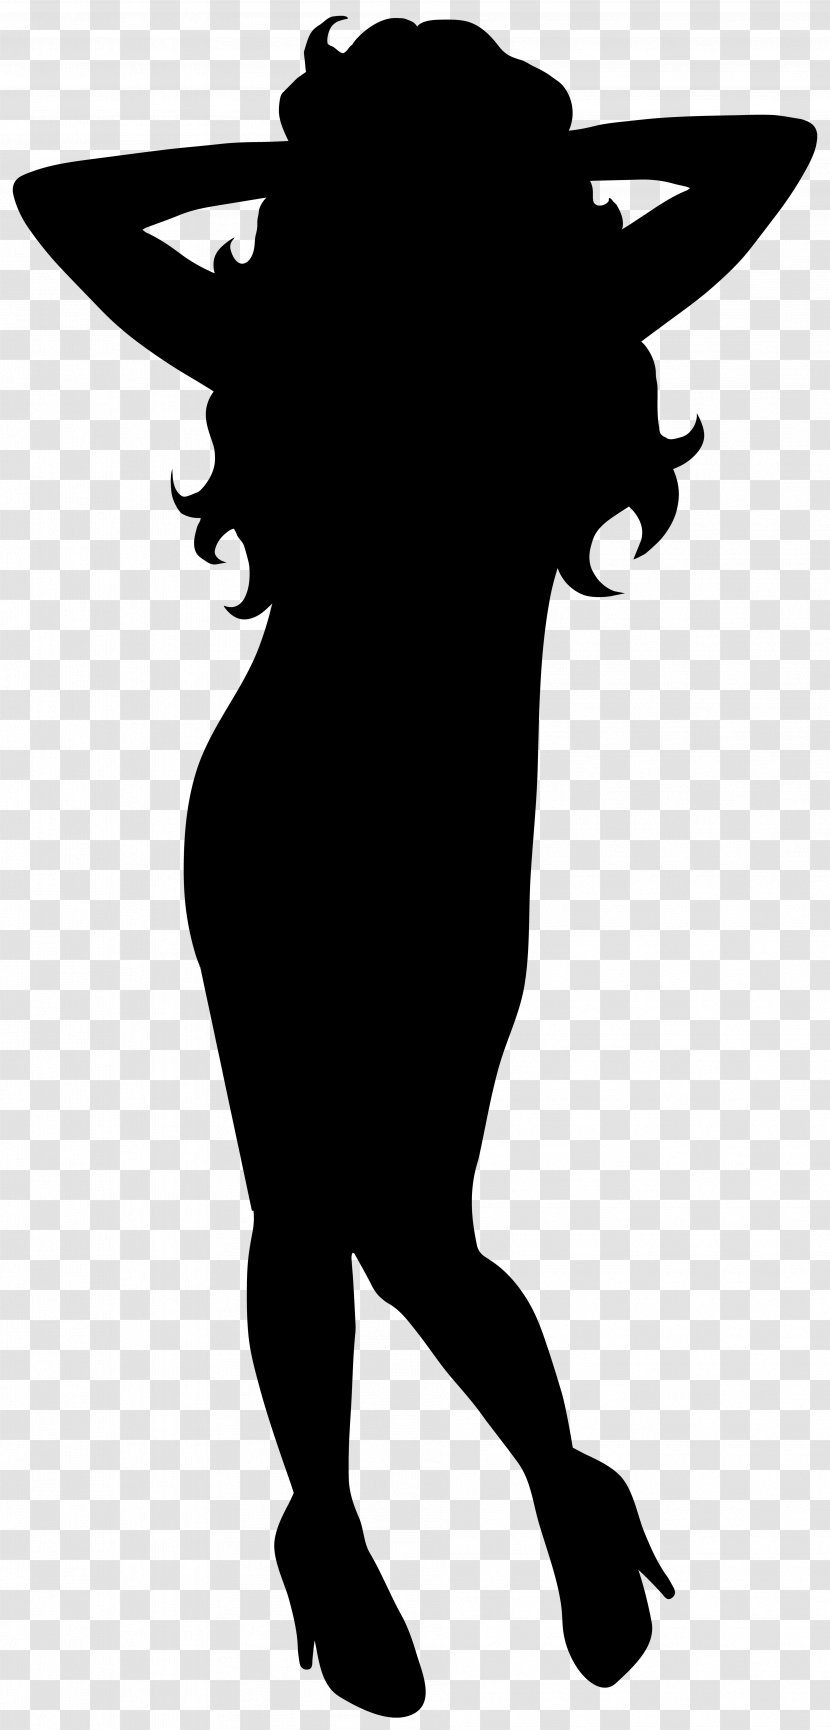 Silhouette Dance Clip Art - Black And White - Dancing Woman Image Transparent PNG